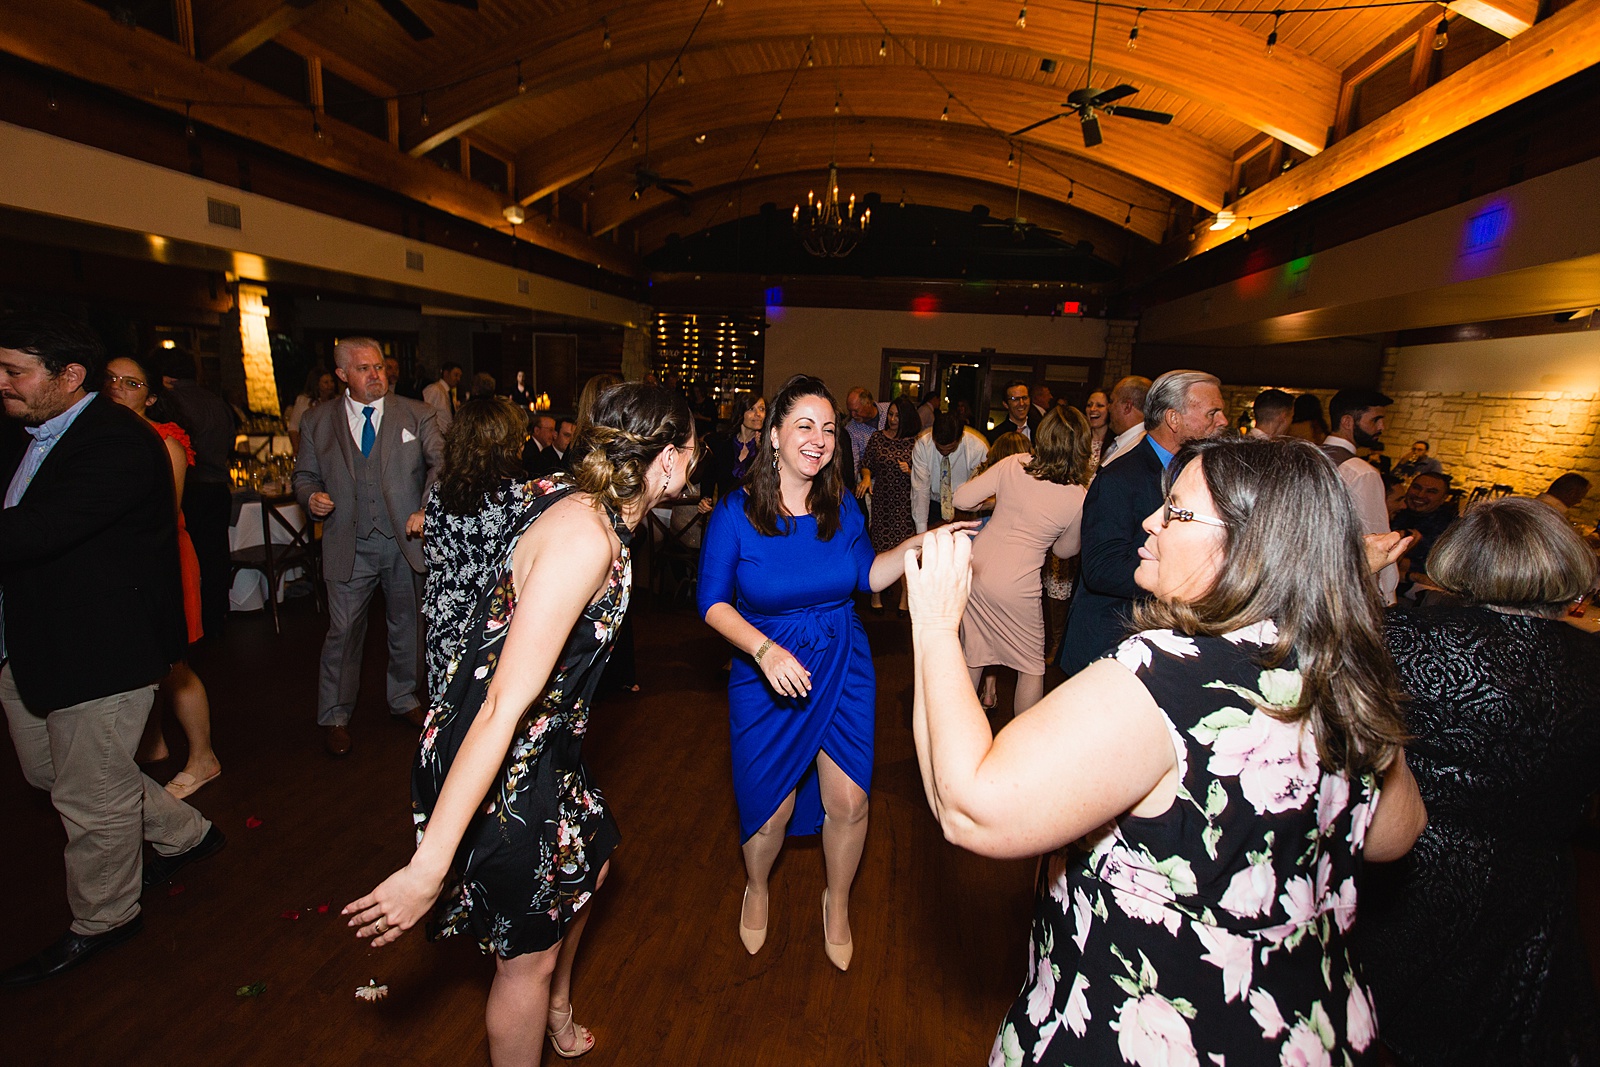 Guests dancing together at Ocotillo Oasis wedding reception by Phoenix wedding photographer PMA Photography